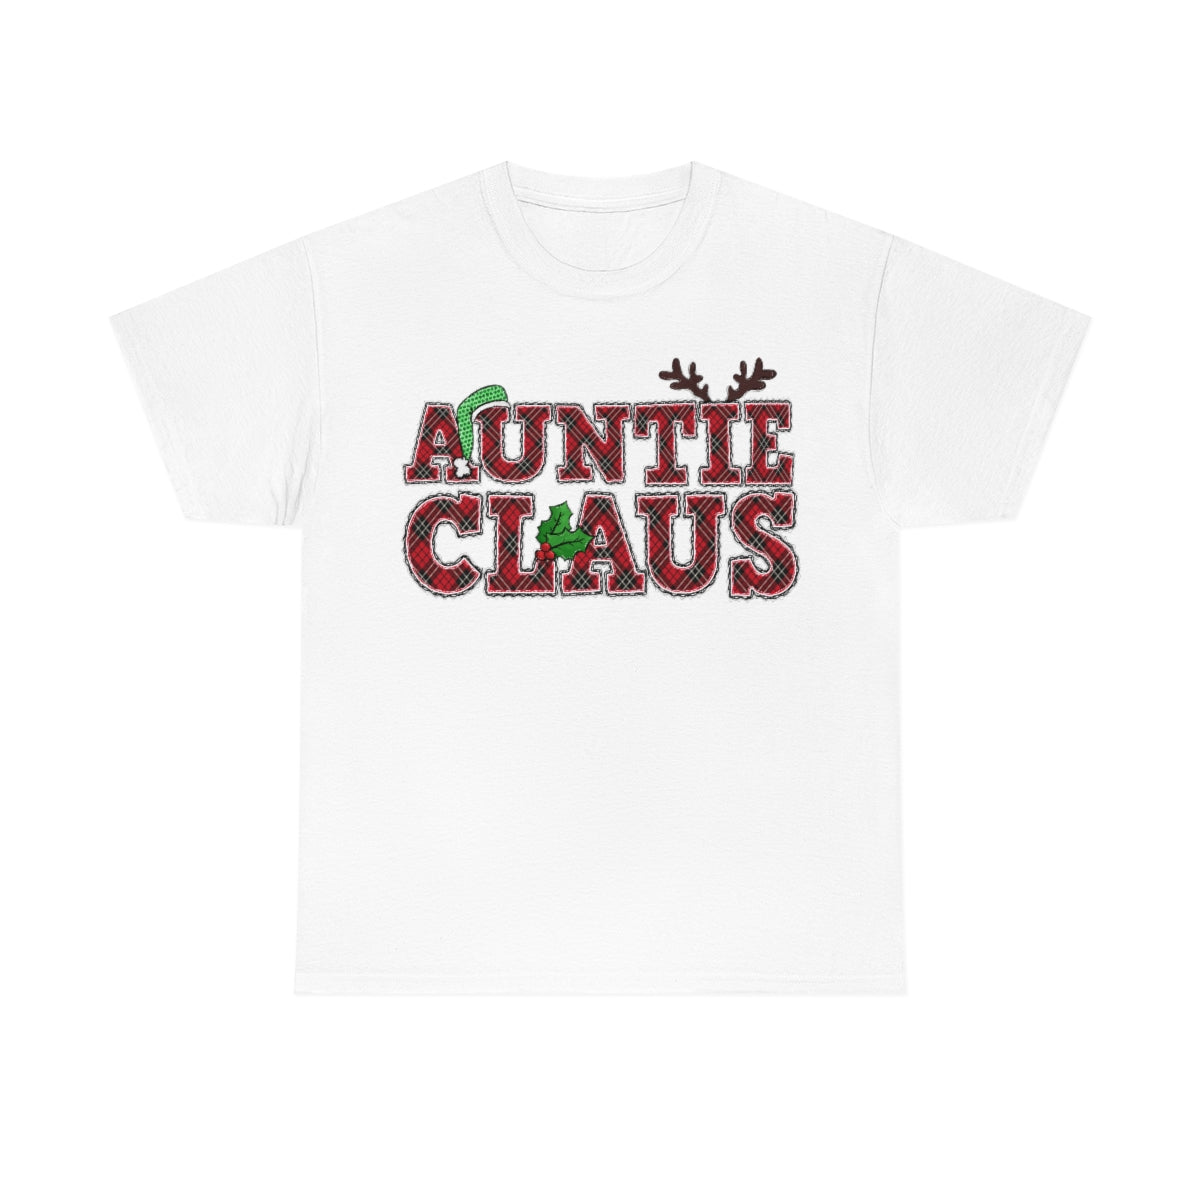 Auntie Claus Christmas T-Shirt